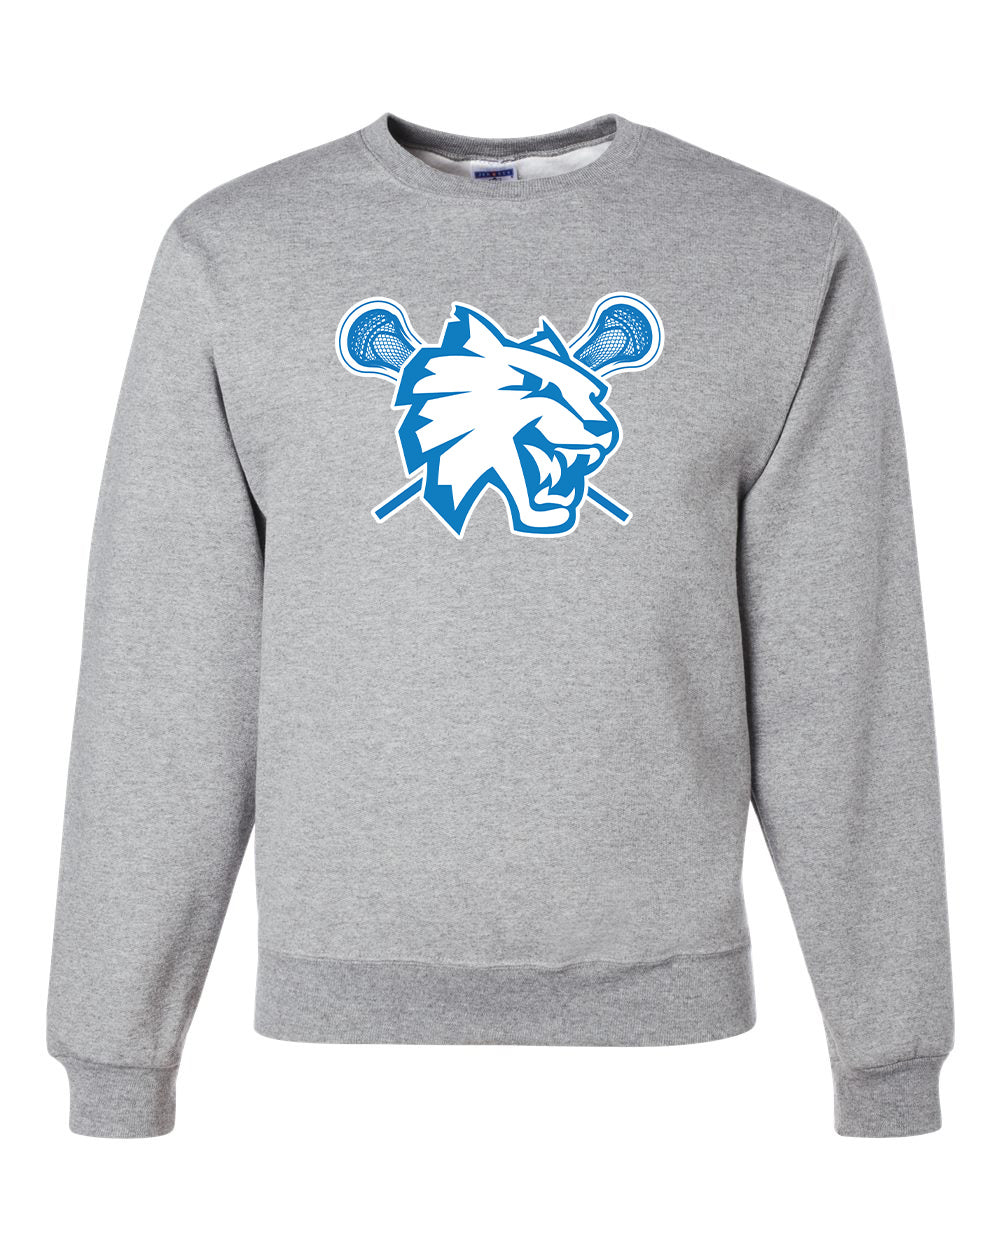 Suffield Youth Lacrosse - Adult Crewneck "Cat" - 562MR (color options available)